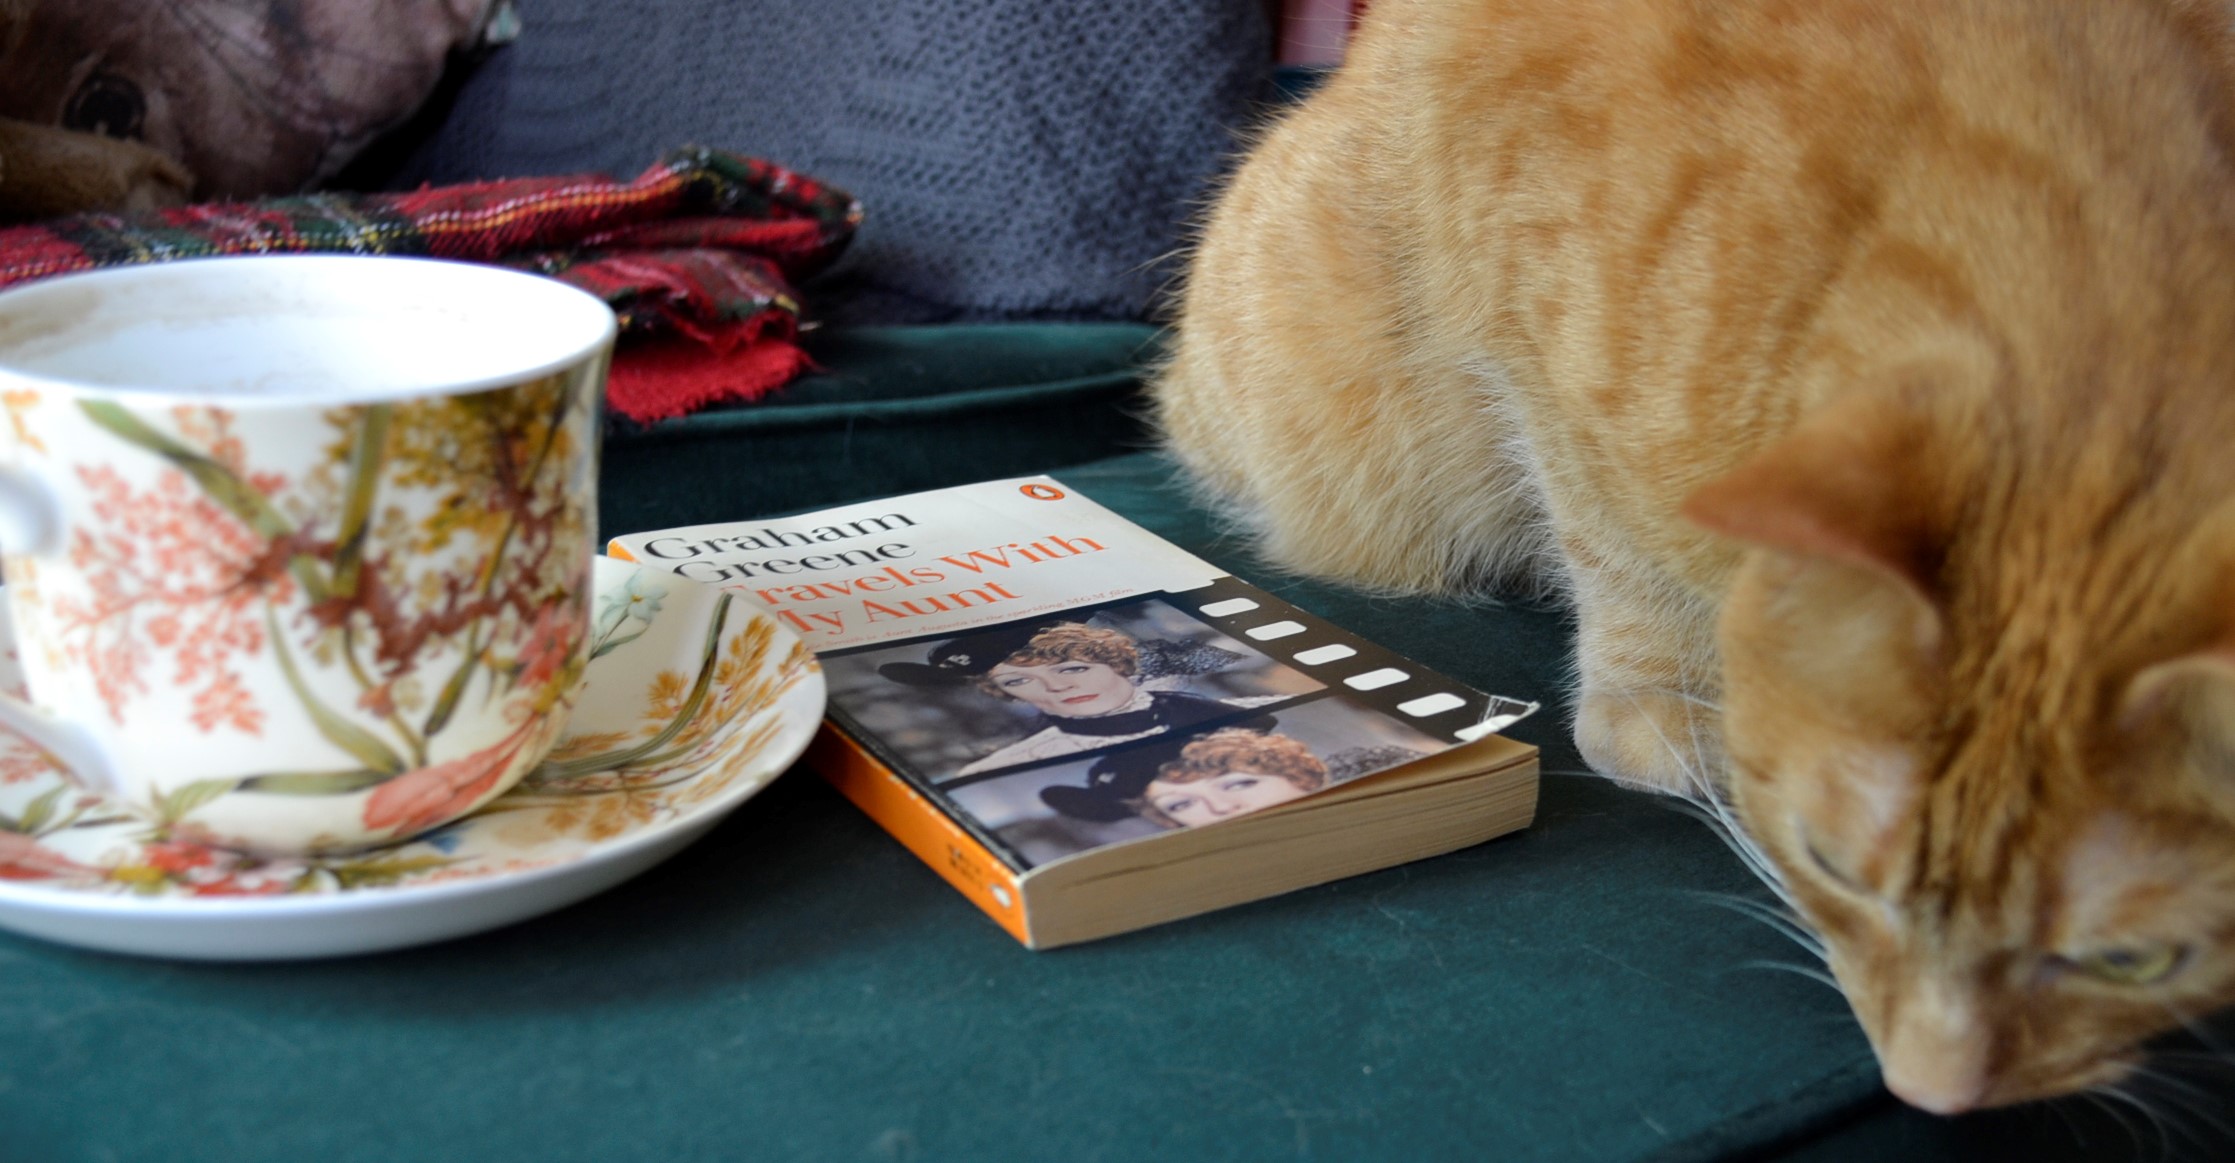 An orange tabby crouched beside a teacup and Travels with My Aunt.